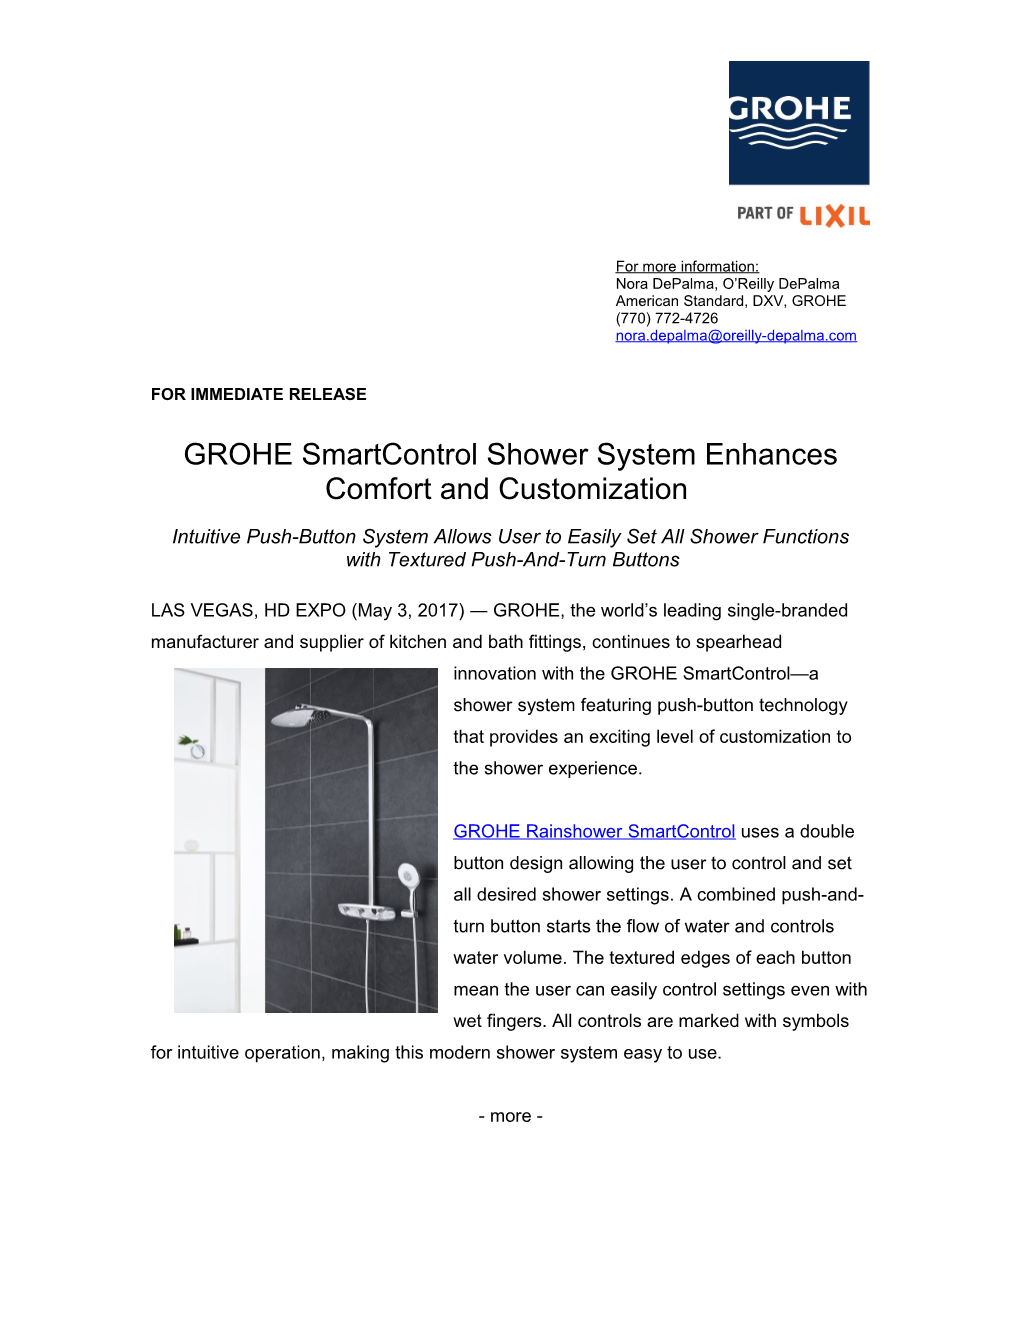 GROHE Smartcontrol Shower System Enhances Comfort and Customization 2-2-2